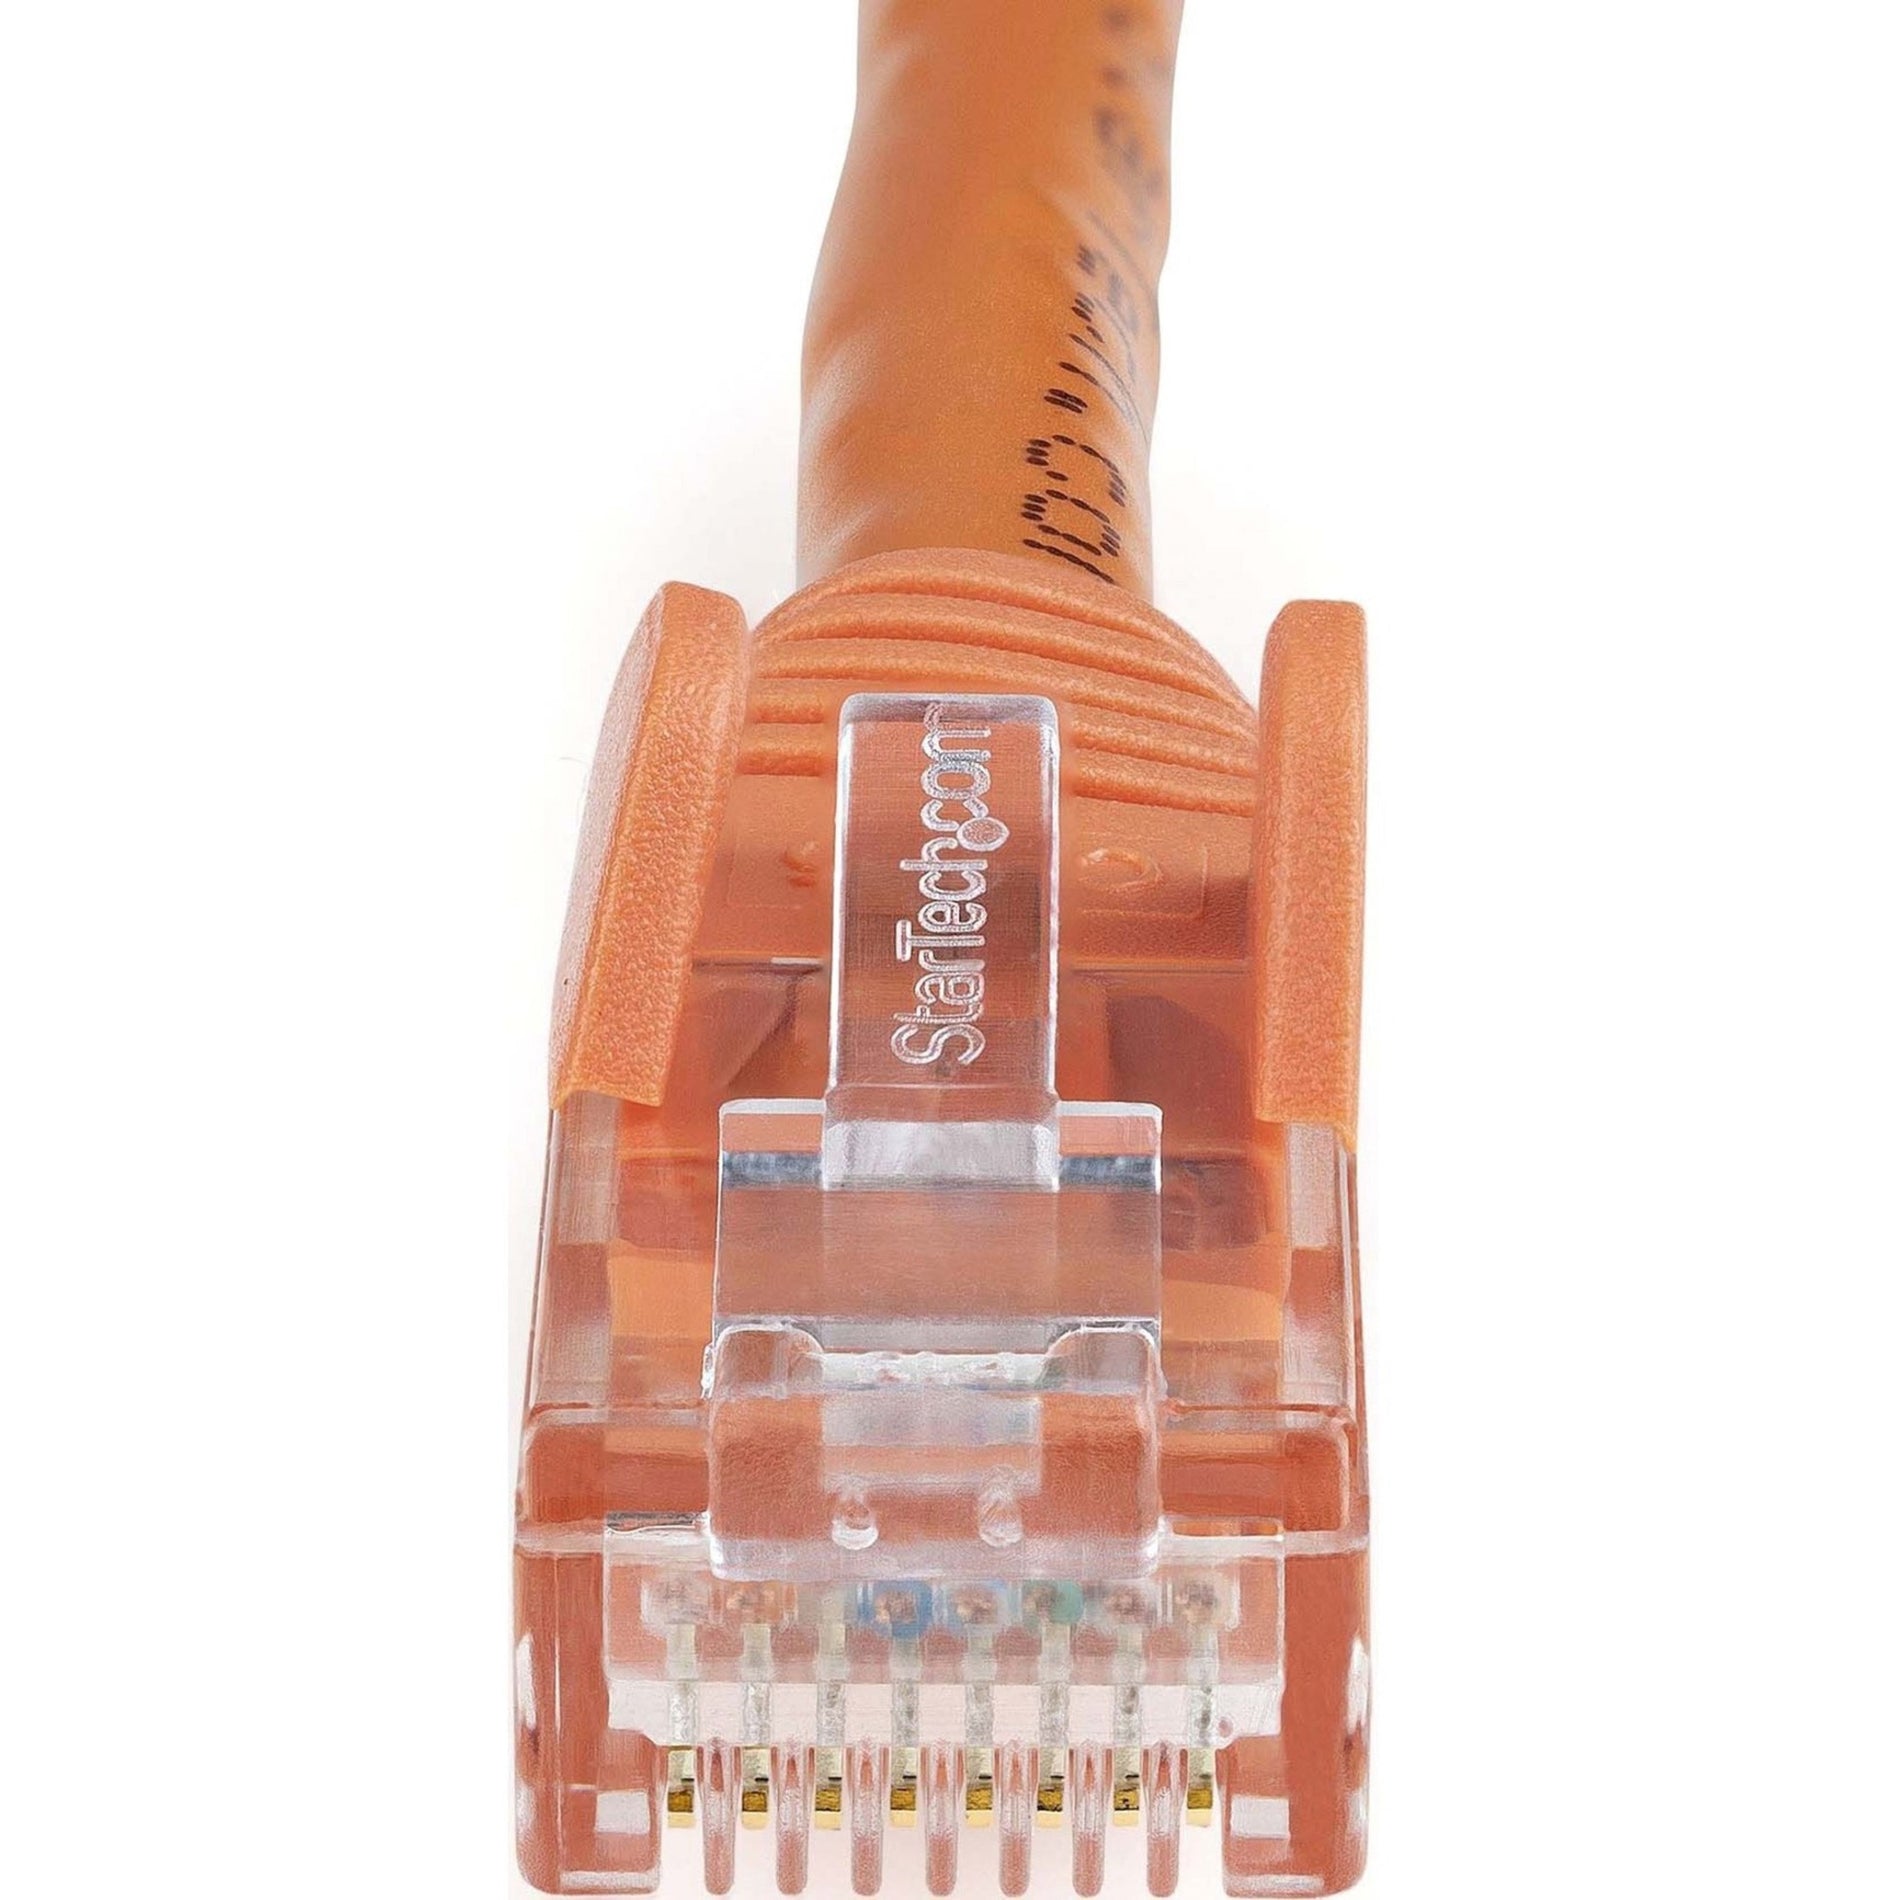 StarTech.com N6PATCH10OR 10 ft Orange Snagless Cat6 UTP Patch Cable, 10 Gbit/s Data Transfer Rate, Lifetime Warranty